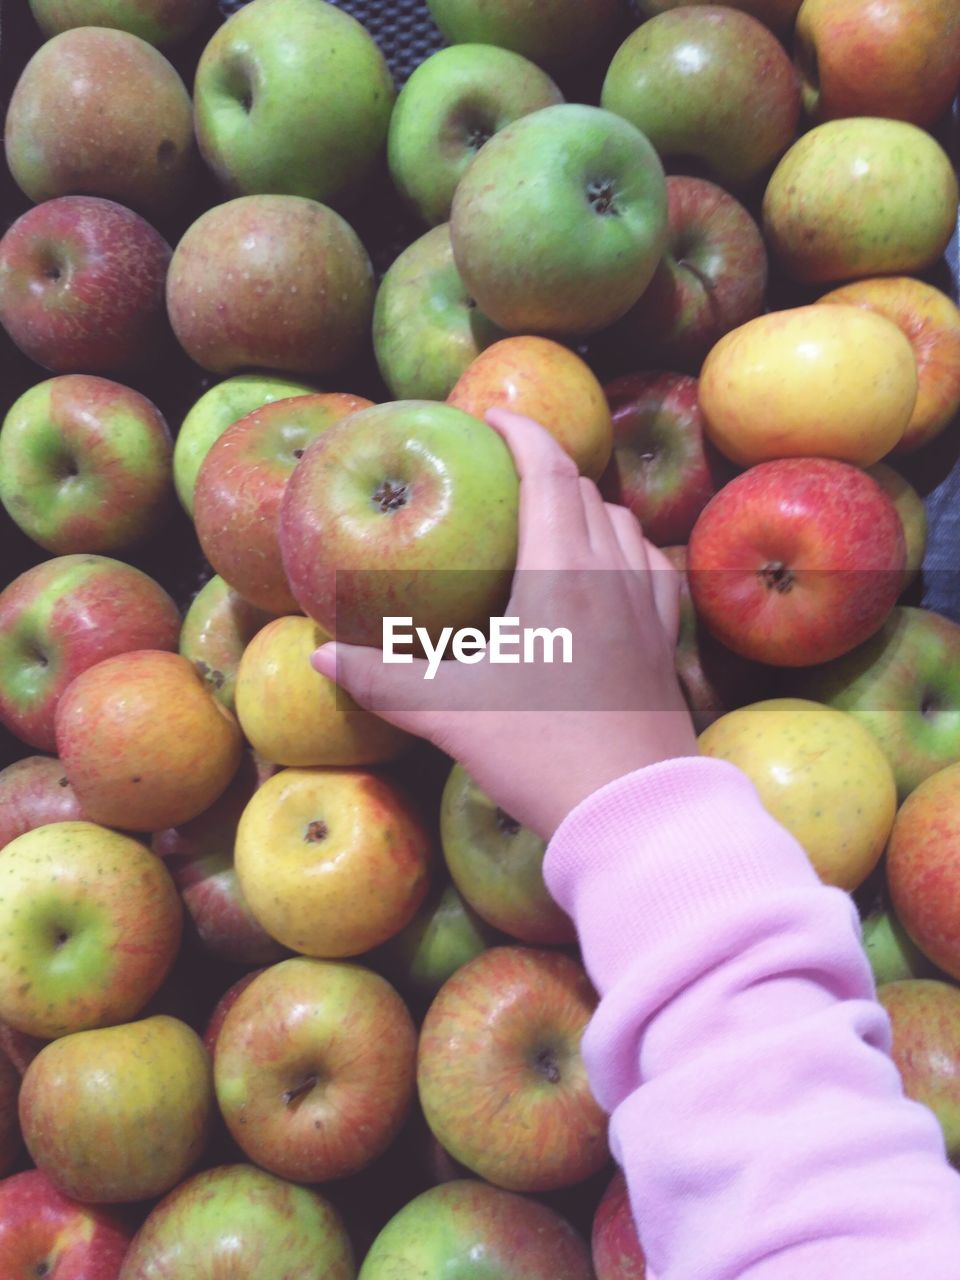 CLOSE-UP OF HAND HOLDING APPLES